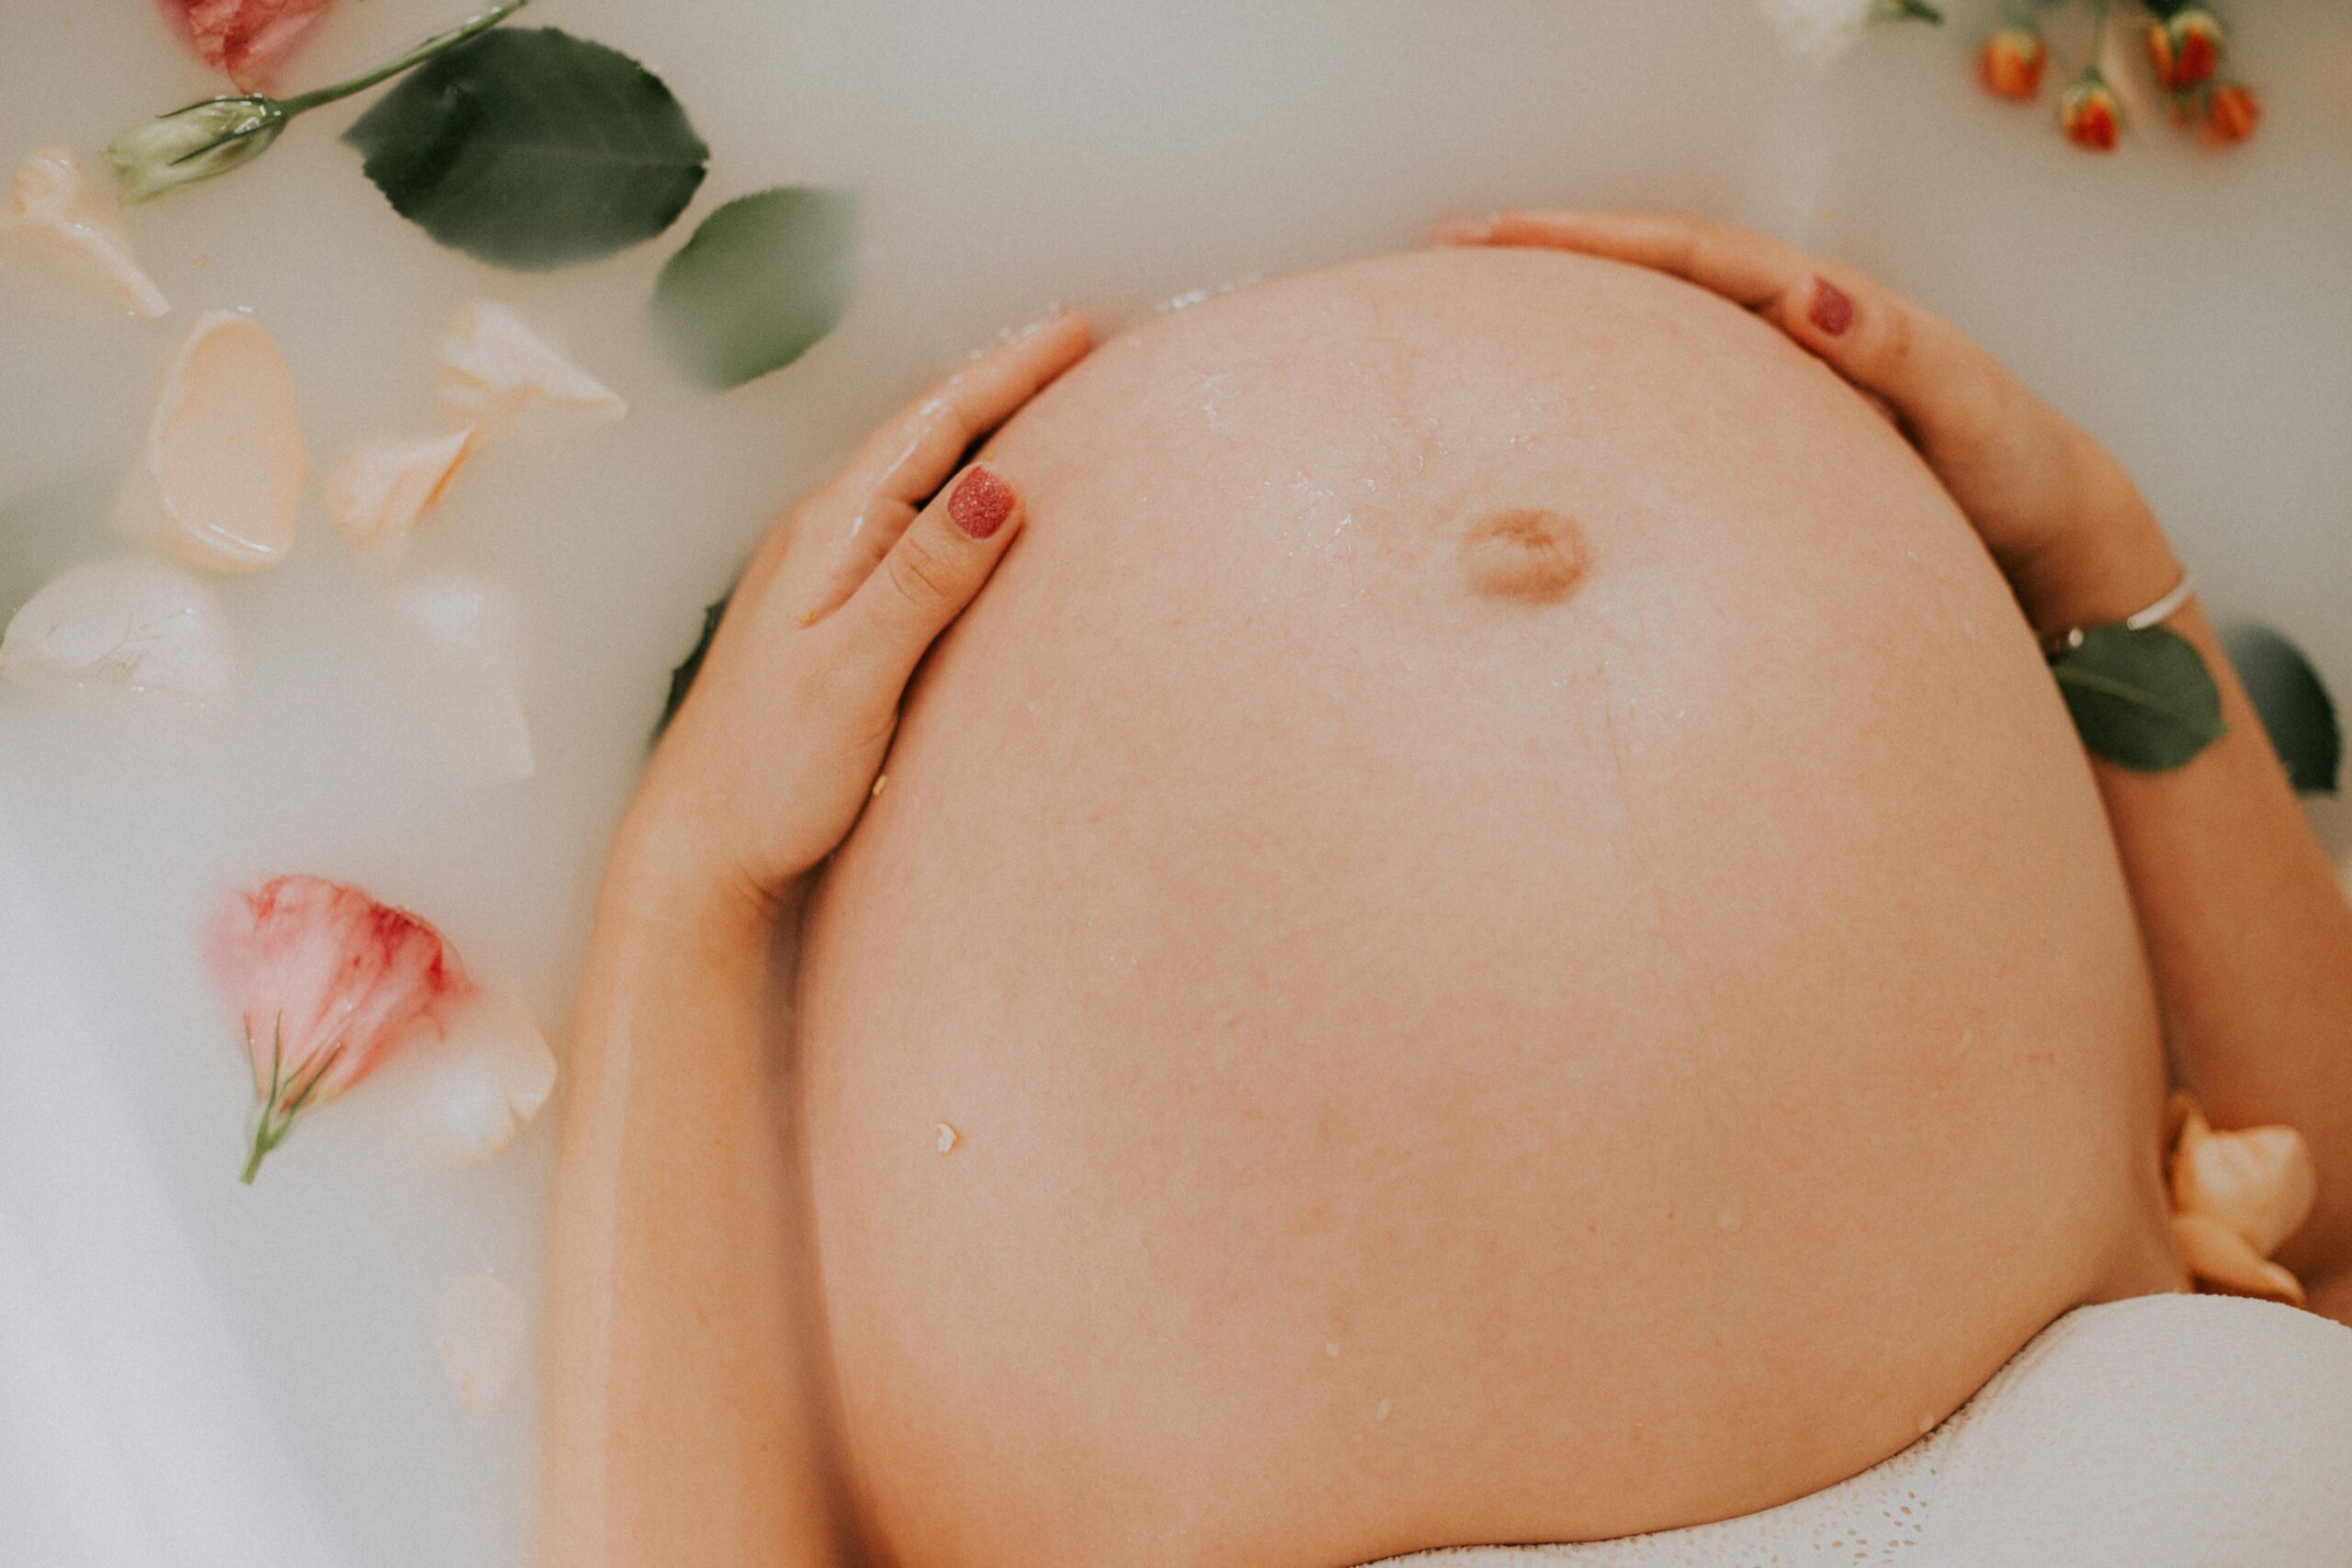 Integrating Mindfulness into Your Pregnancy